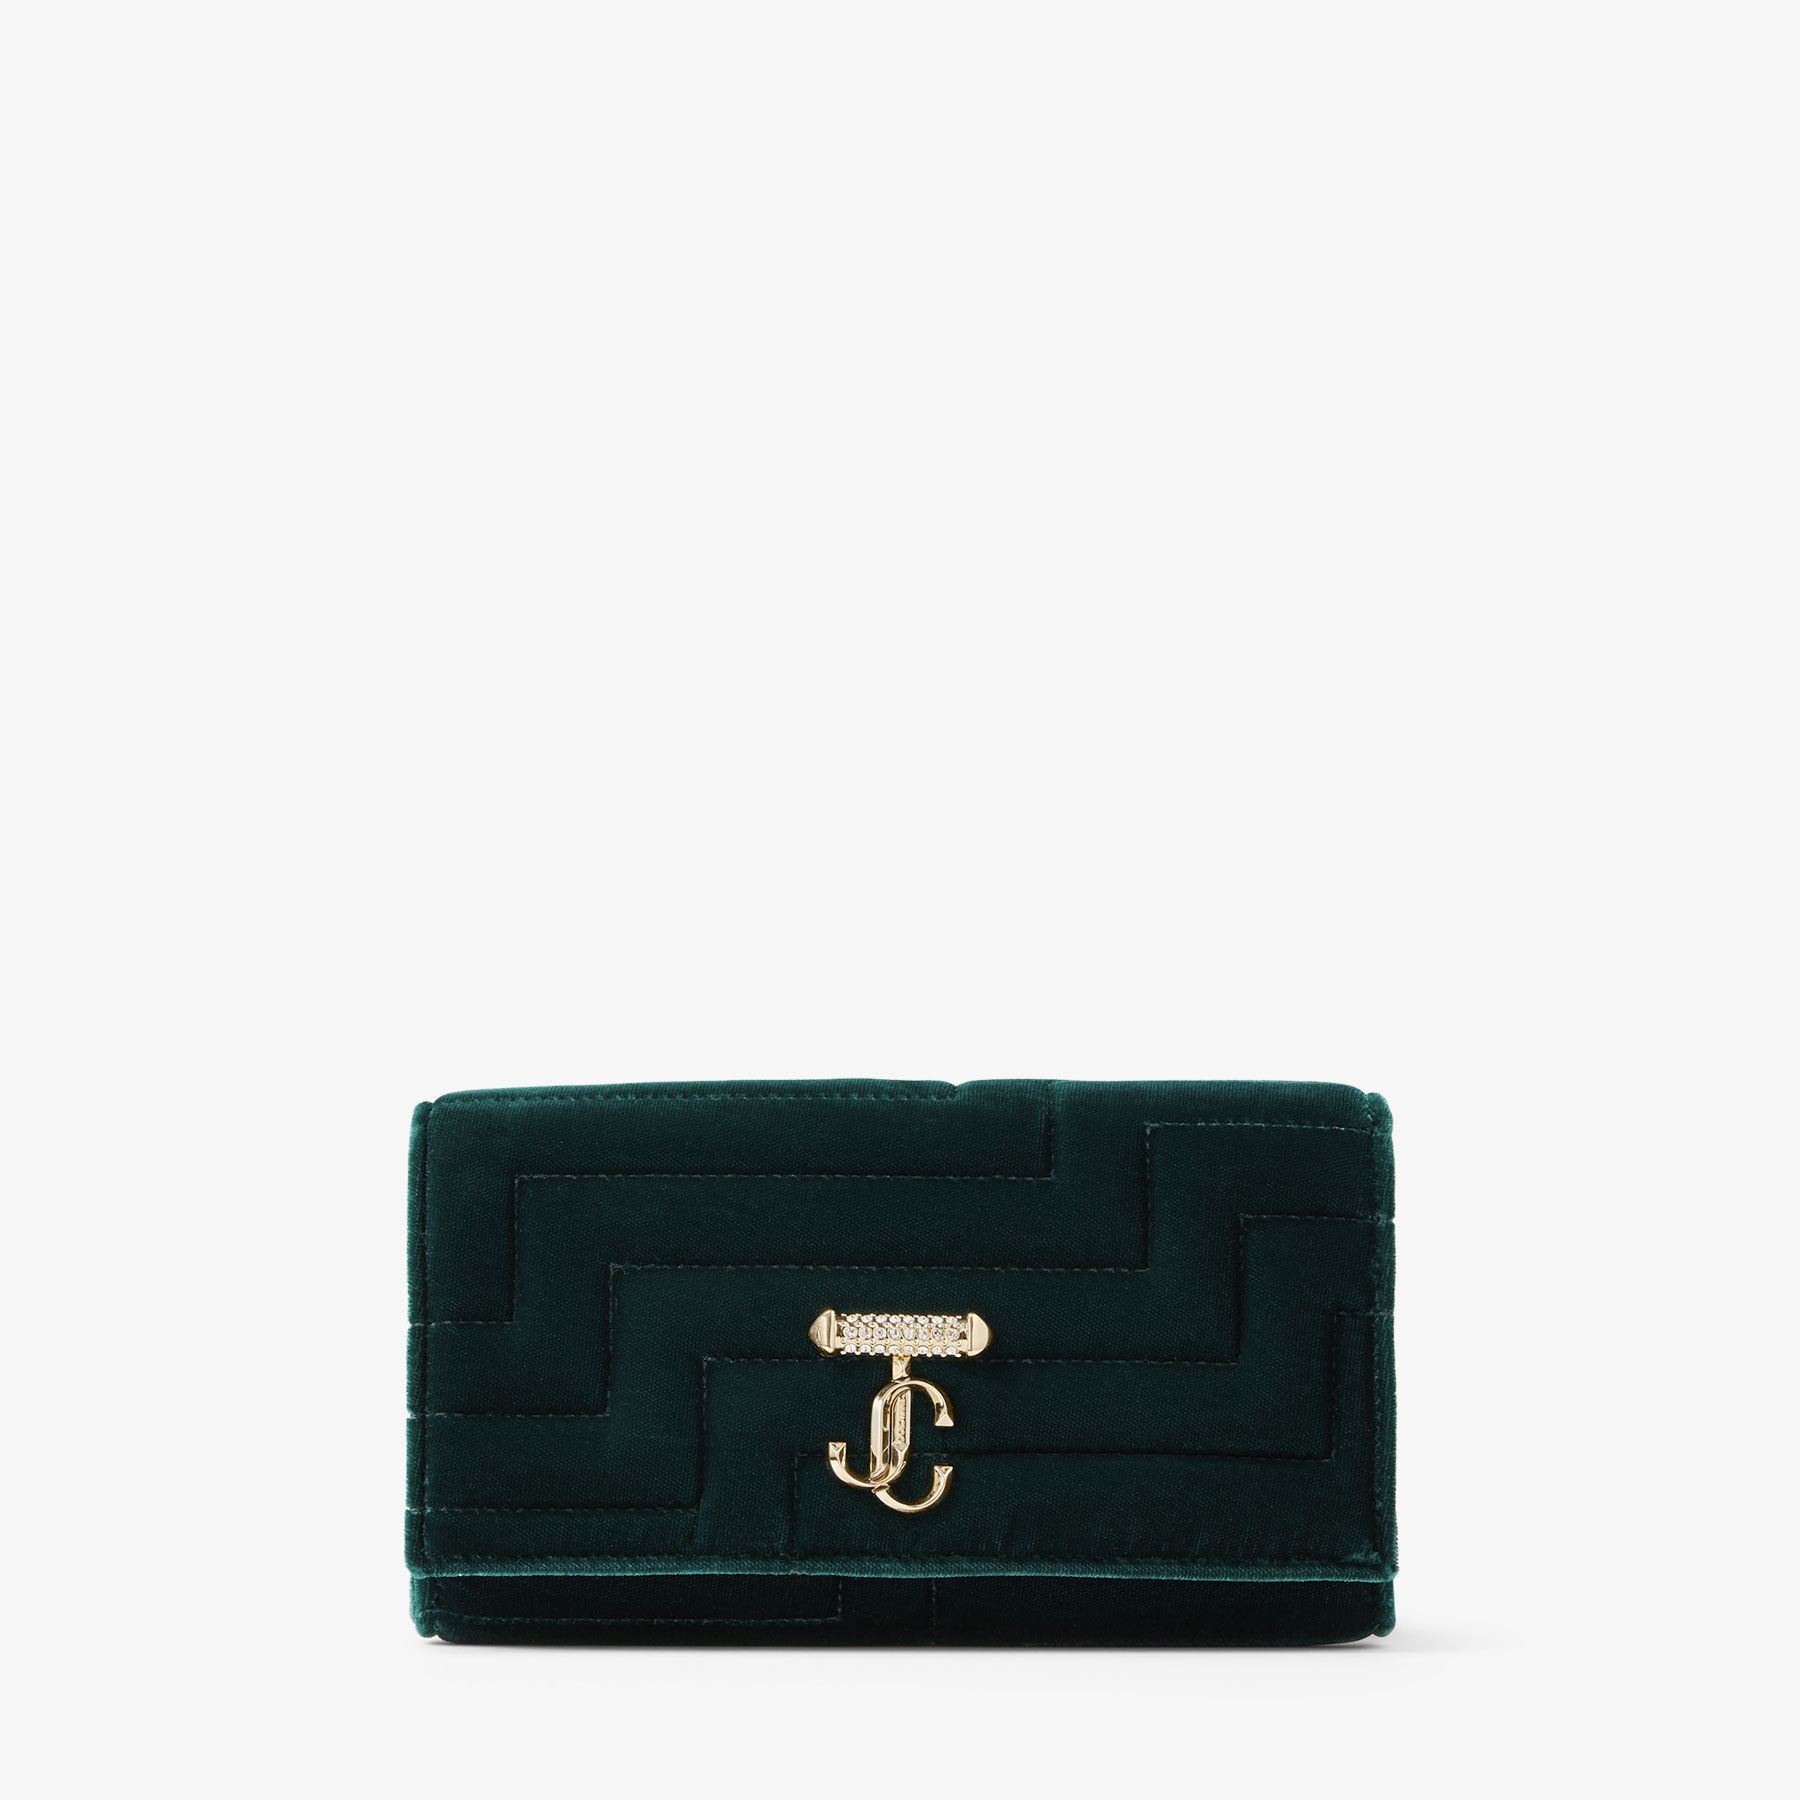 Avenue Wallet with Chain
Dark Green Avenue Velvet Wallet with Chain - 1